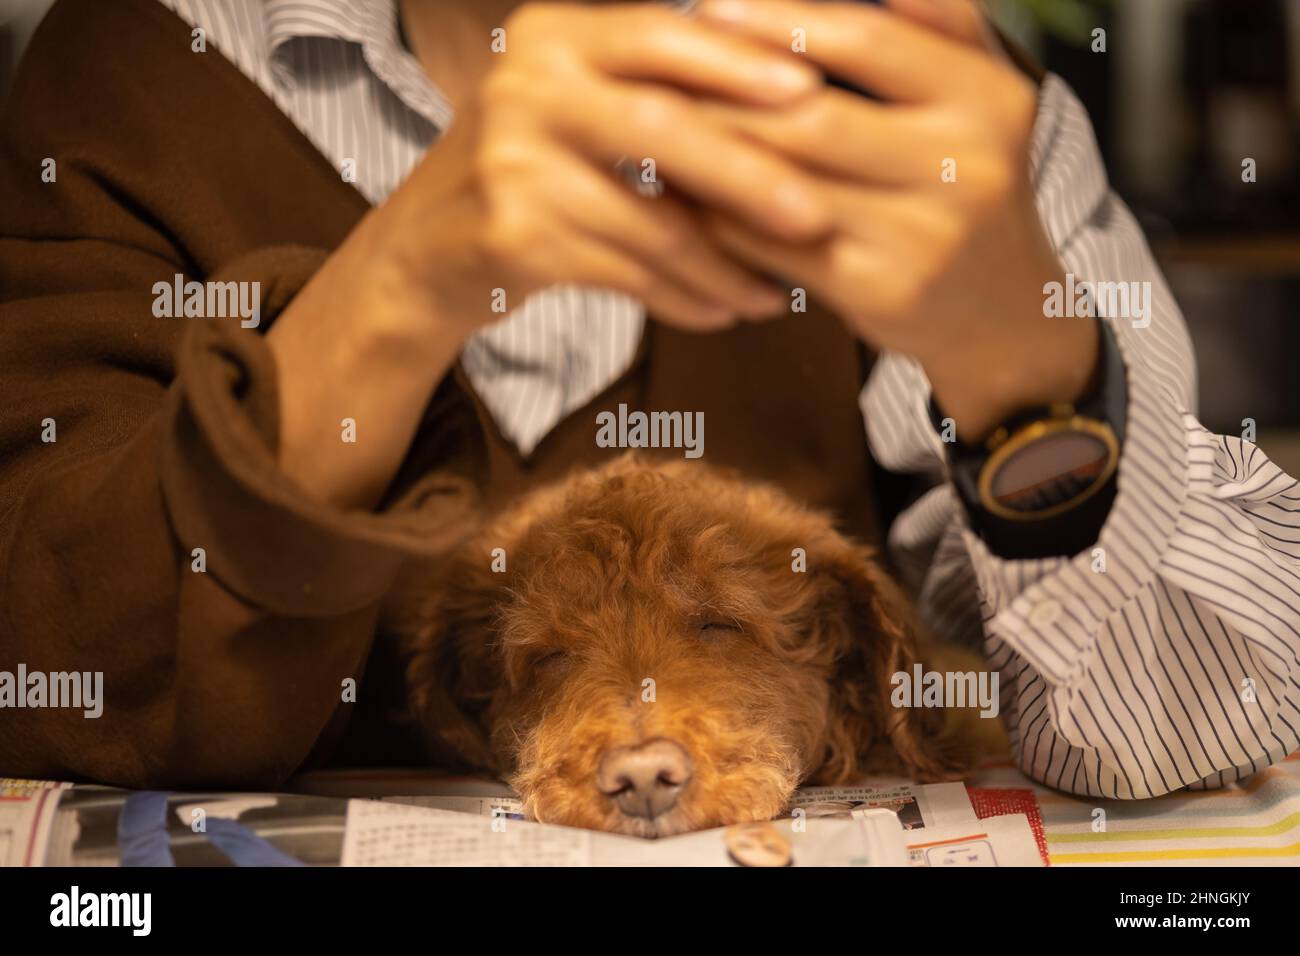 Sleepind and relaxed dog resting safely, securly and comfortably in his human's lap. Stock Photo